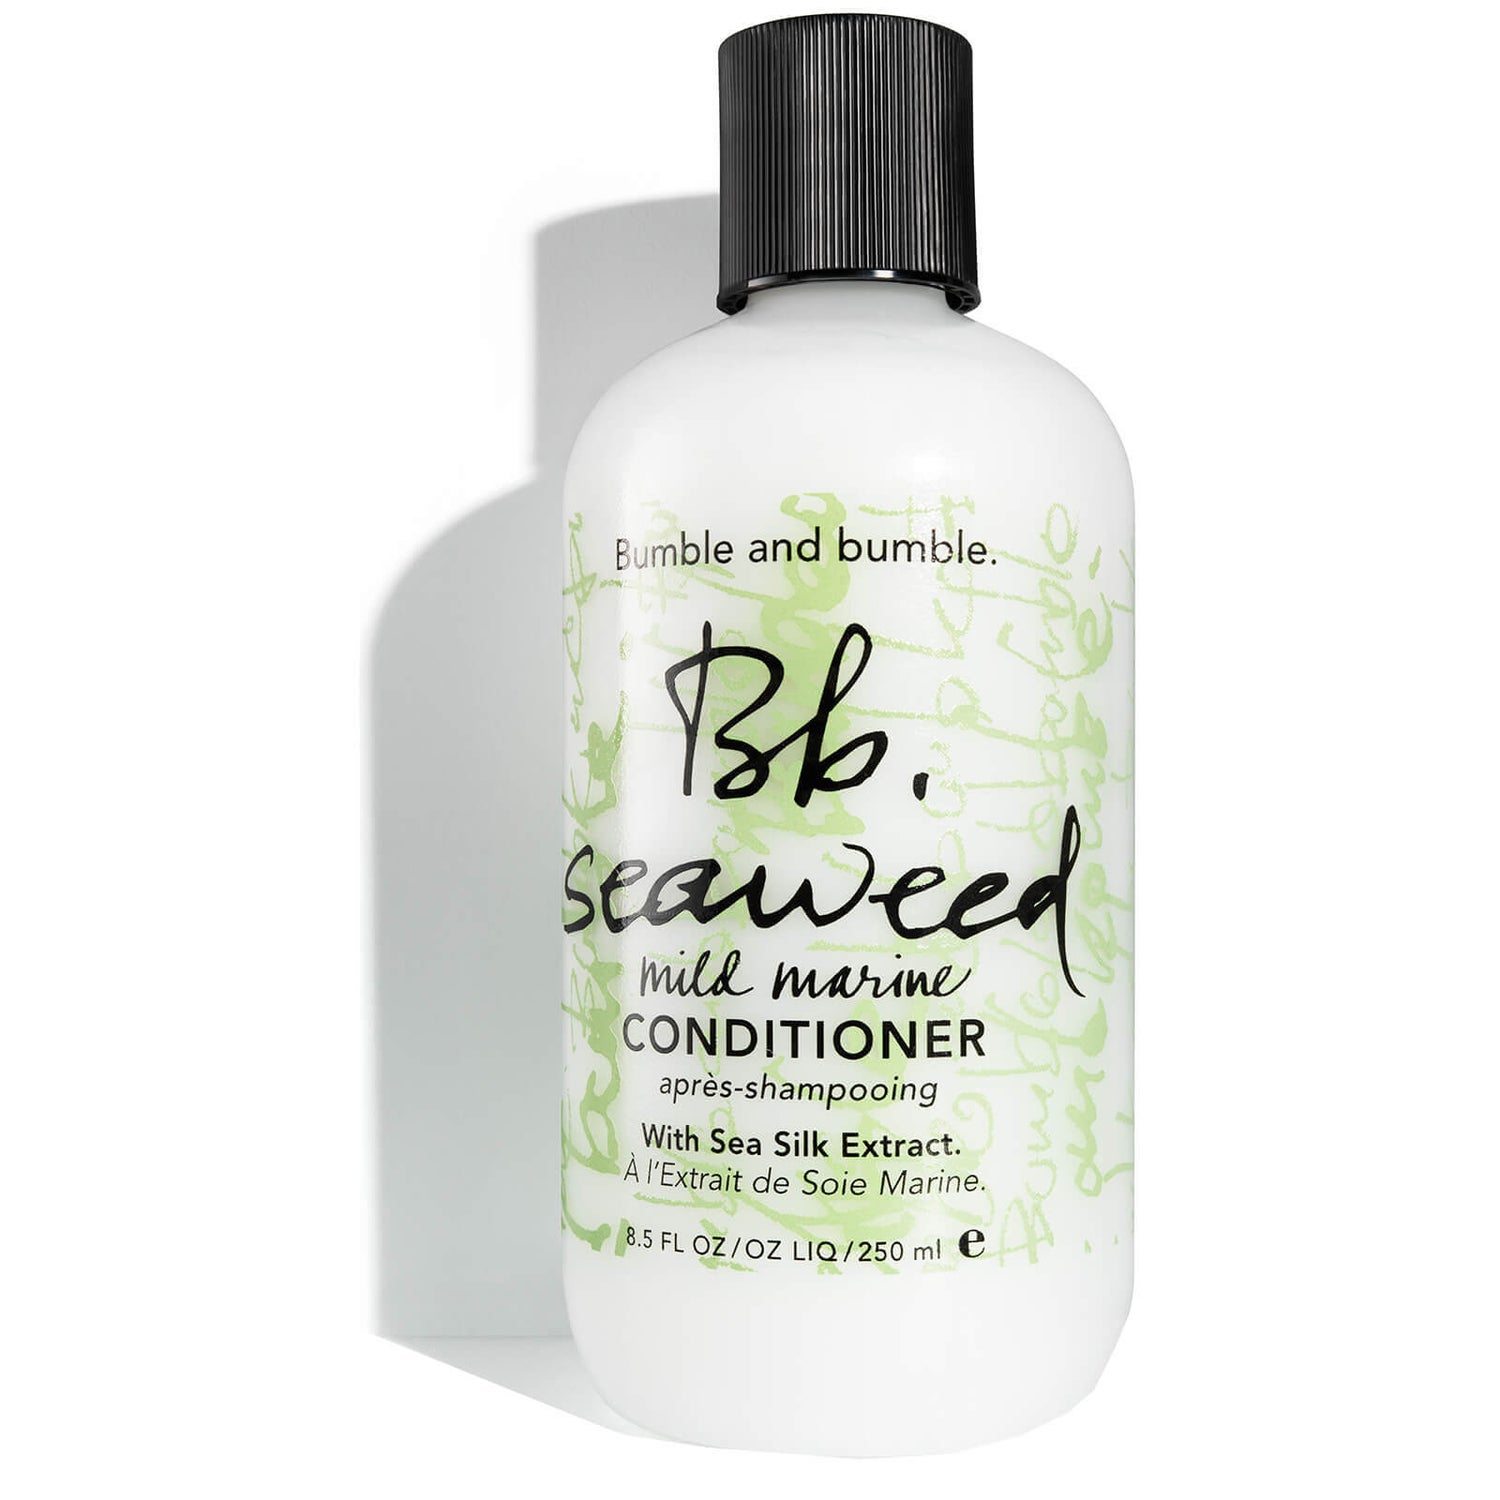 Après-shampooing Bumble and bumble Seaweed Conditioner 250ml